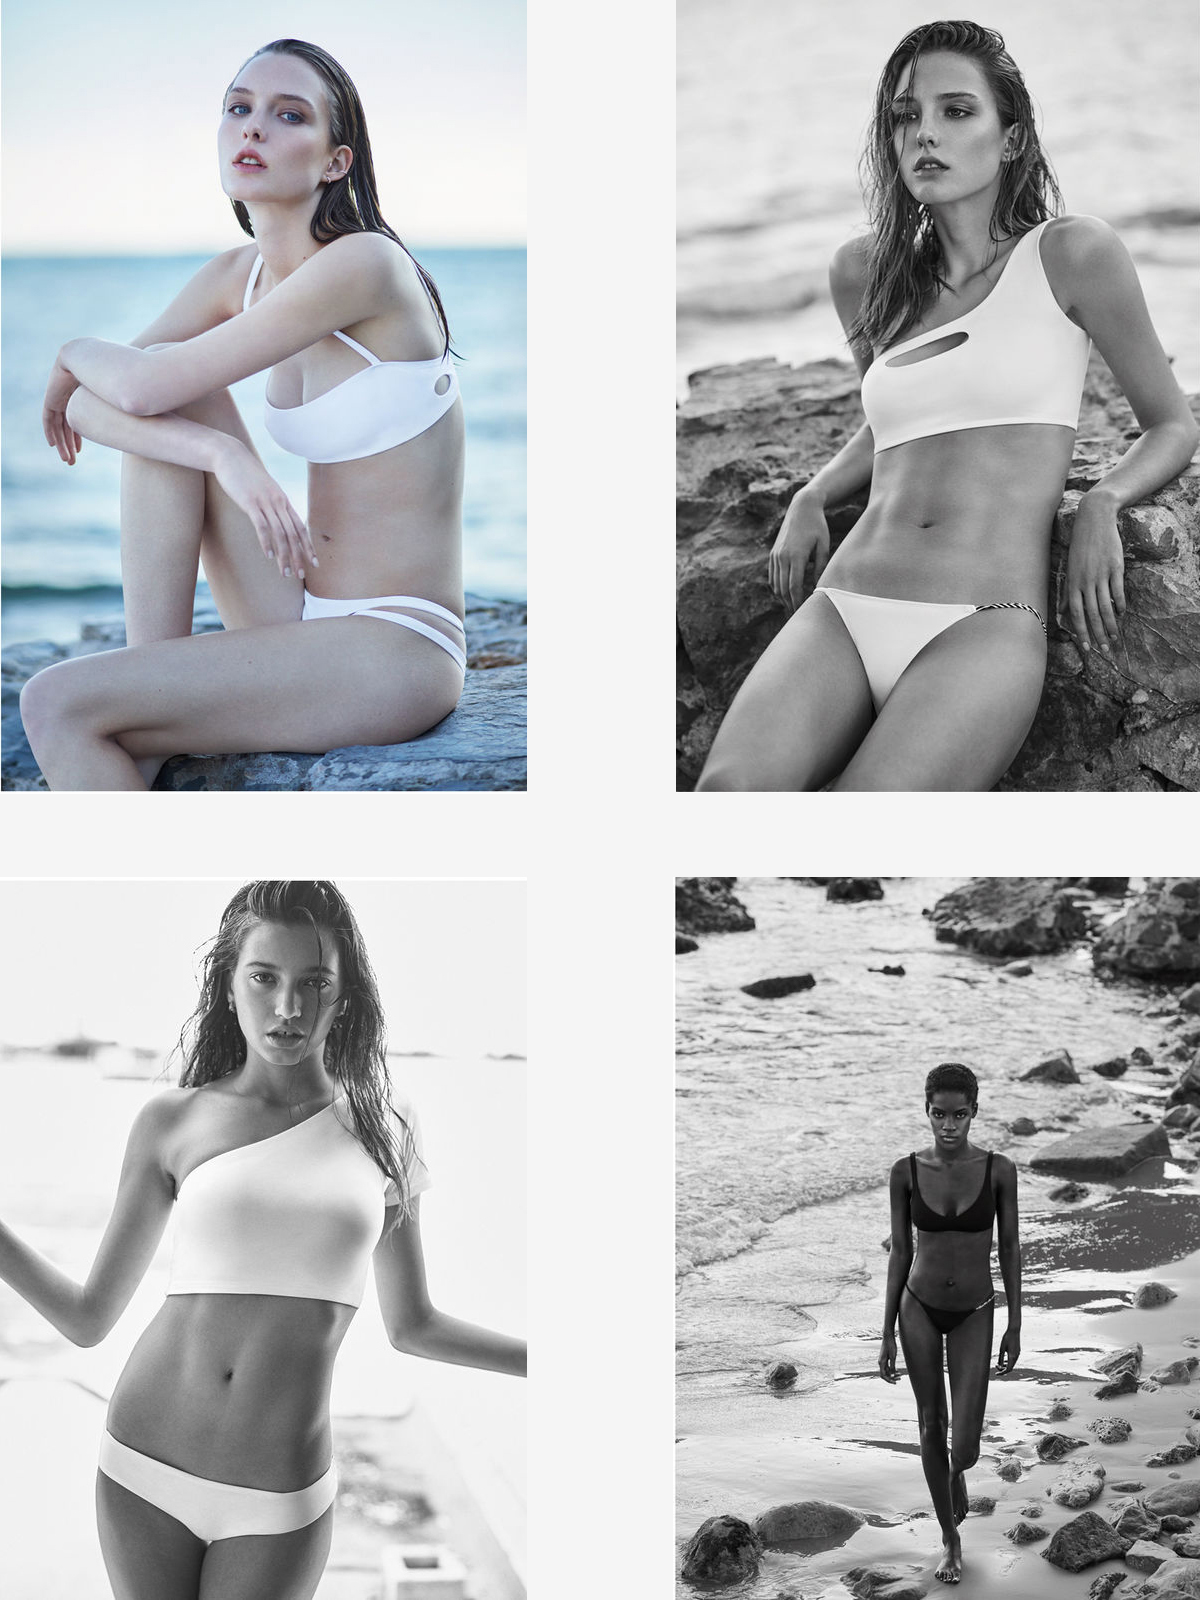 Ethical and eco-friendly minimal swimwear brands